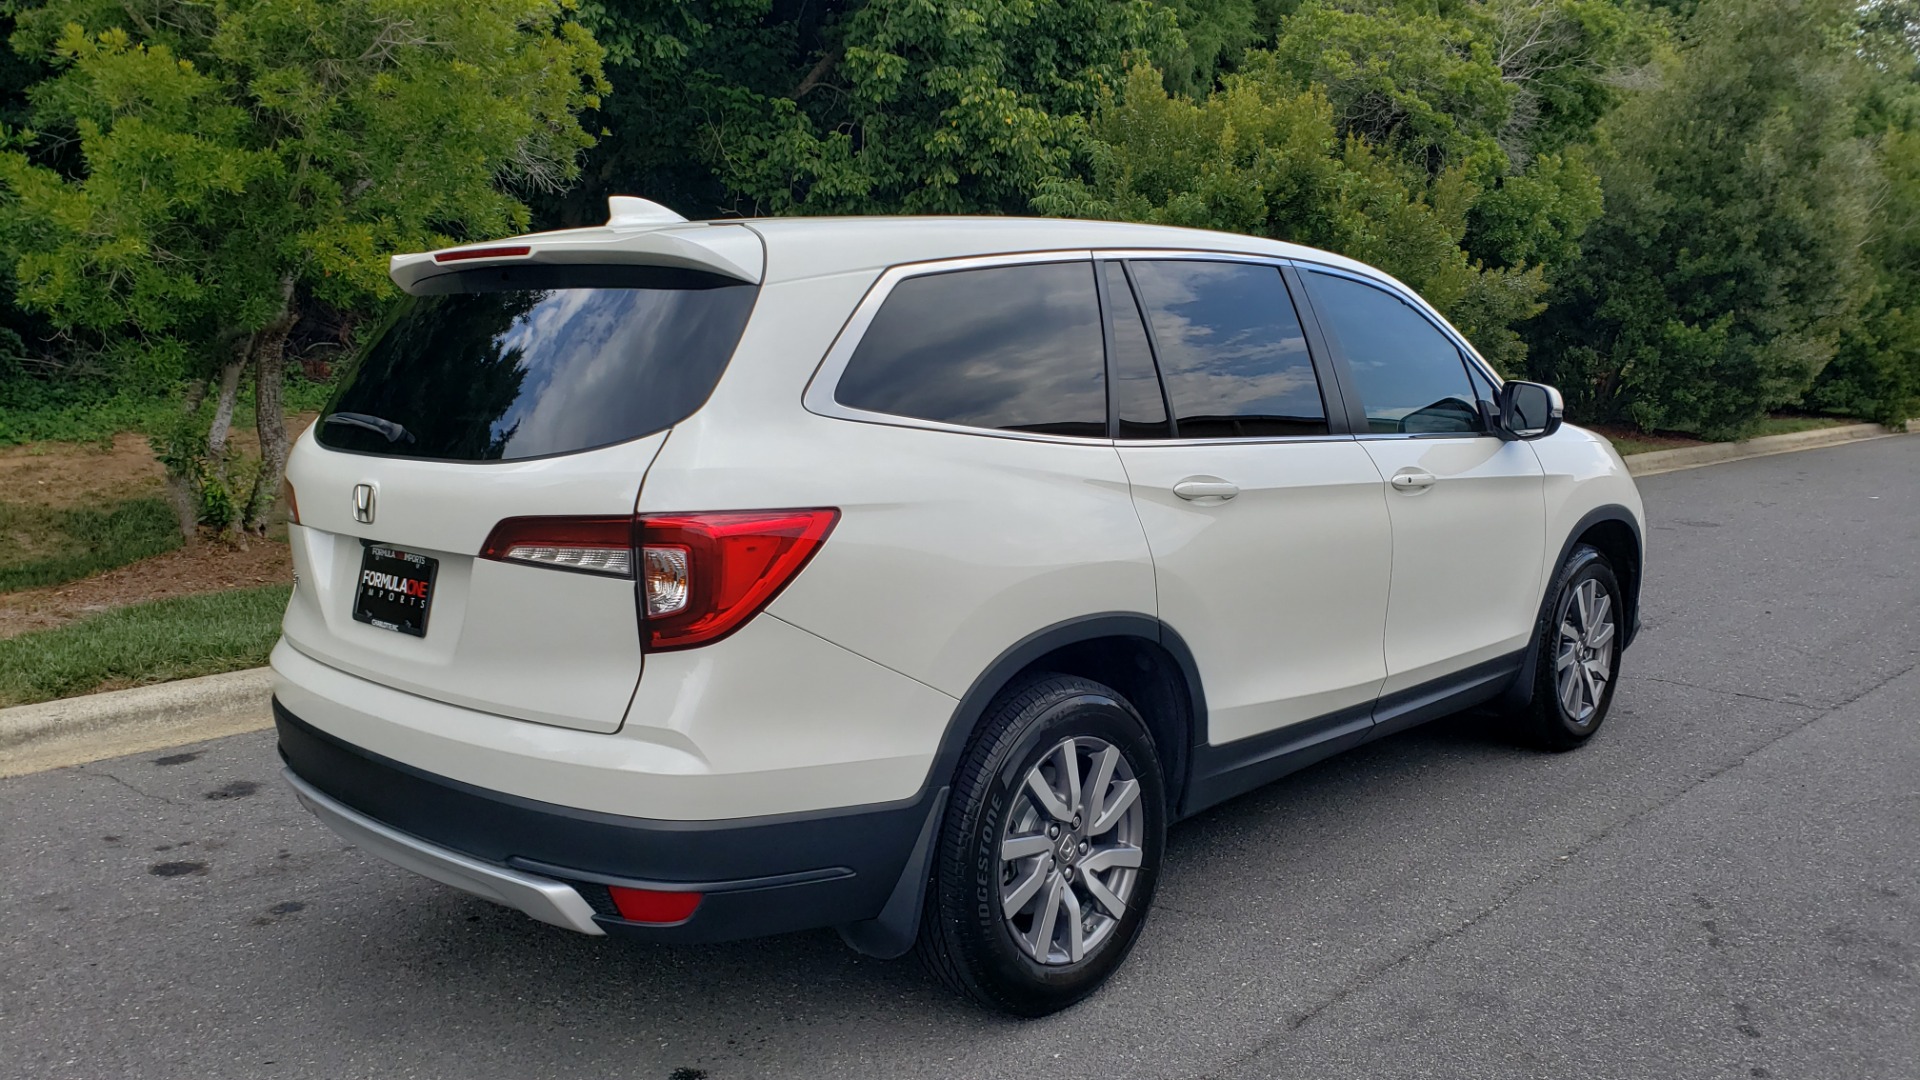 Used 2019 Honda PILOT EX-L / V6 / NAV / SUNROOF / DVD / 3-ROW / REARVIEW for sale Sold at Formula Imports in Charlotte NC 28227 6